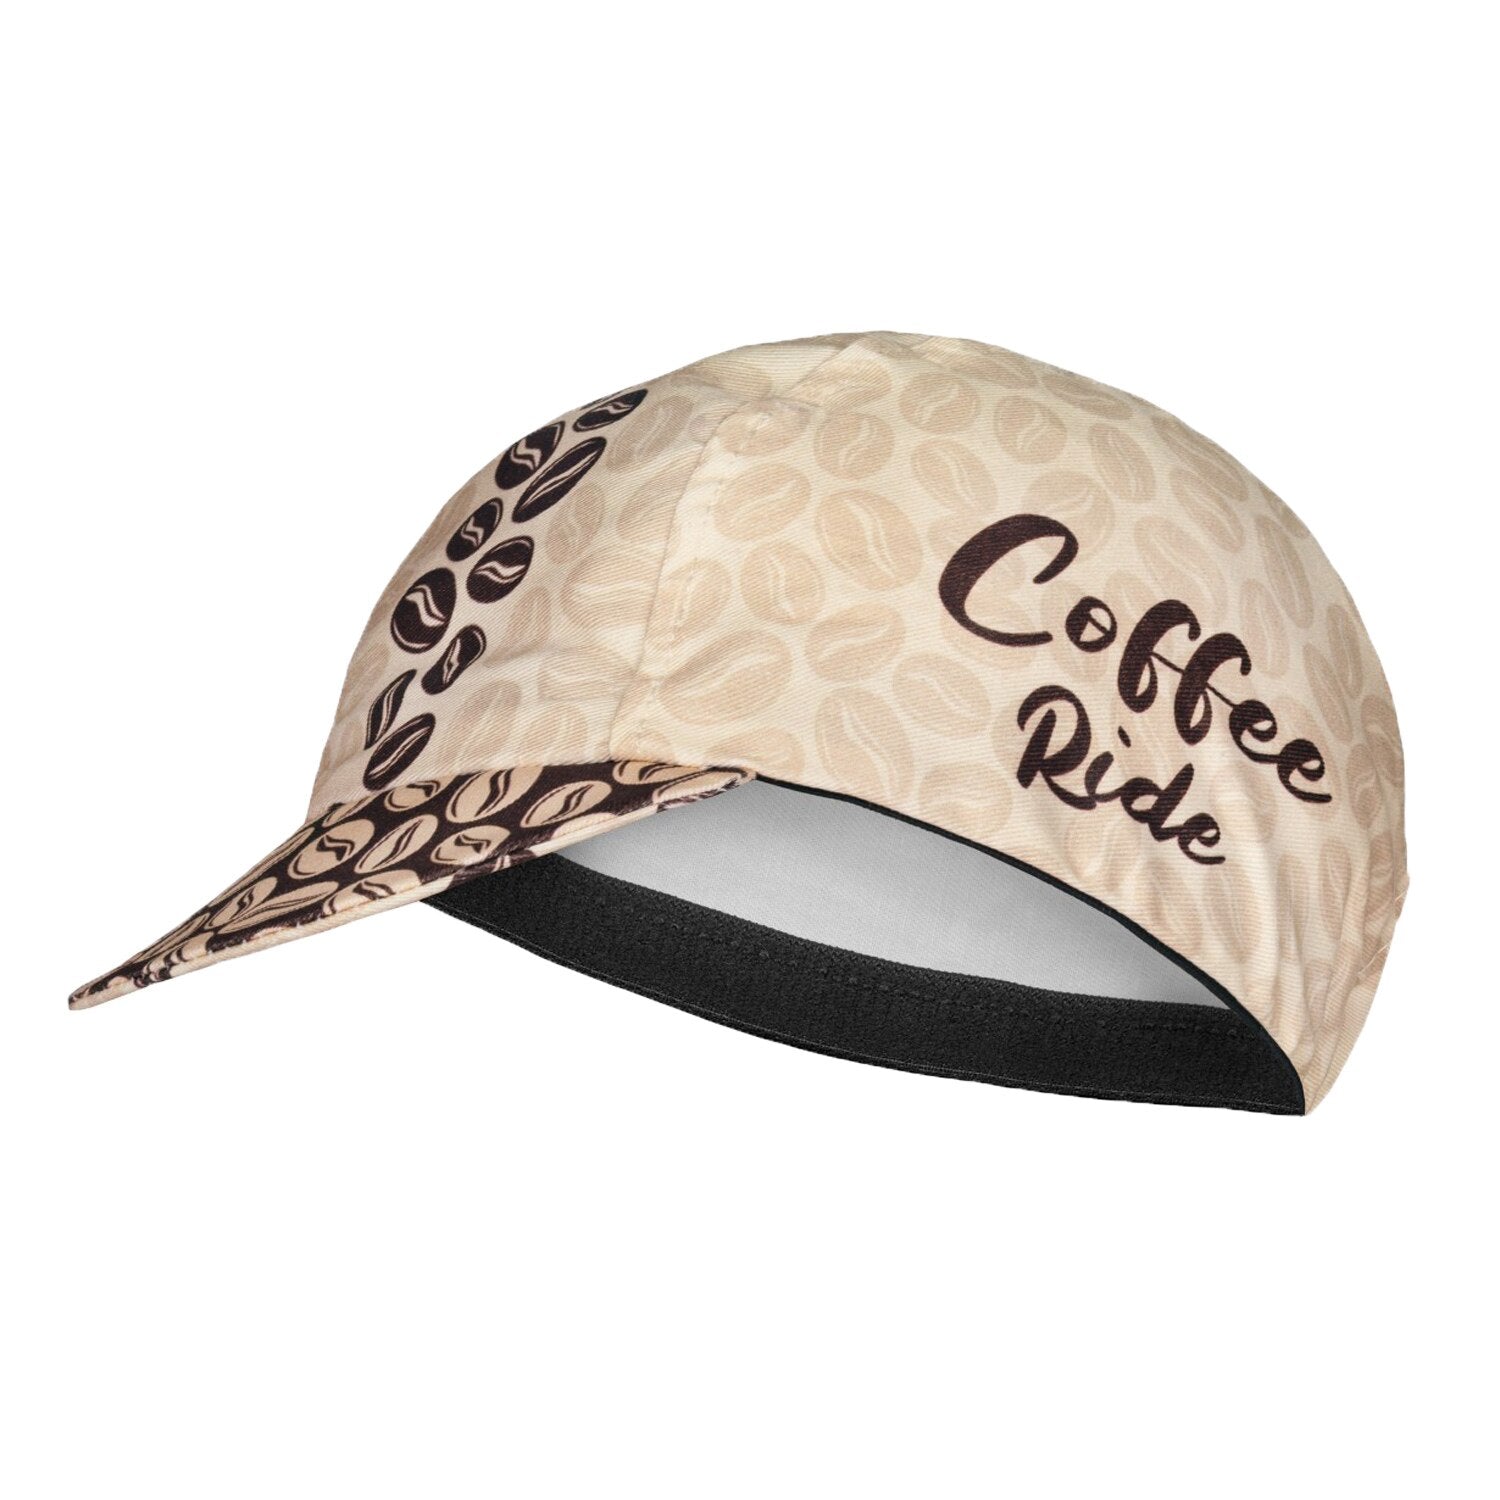 Classic Retro  Coffee Beans Polyester  Bicycle Hats Summer Quick Drying Team Road Bike Sports Cycling Caps